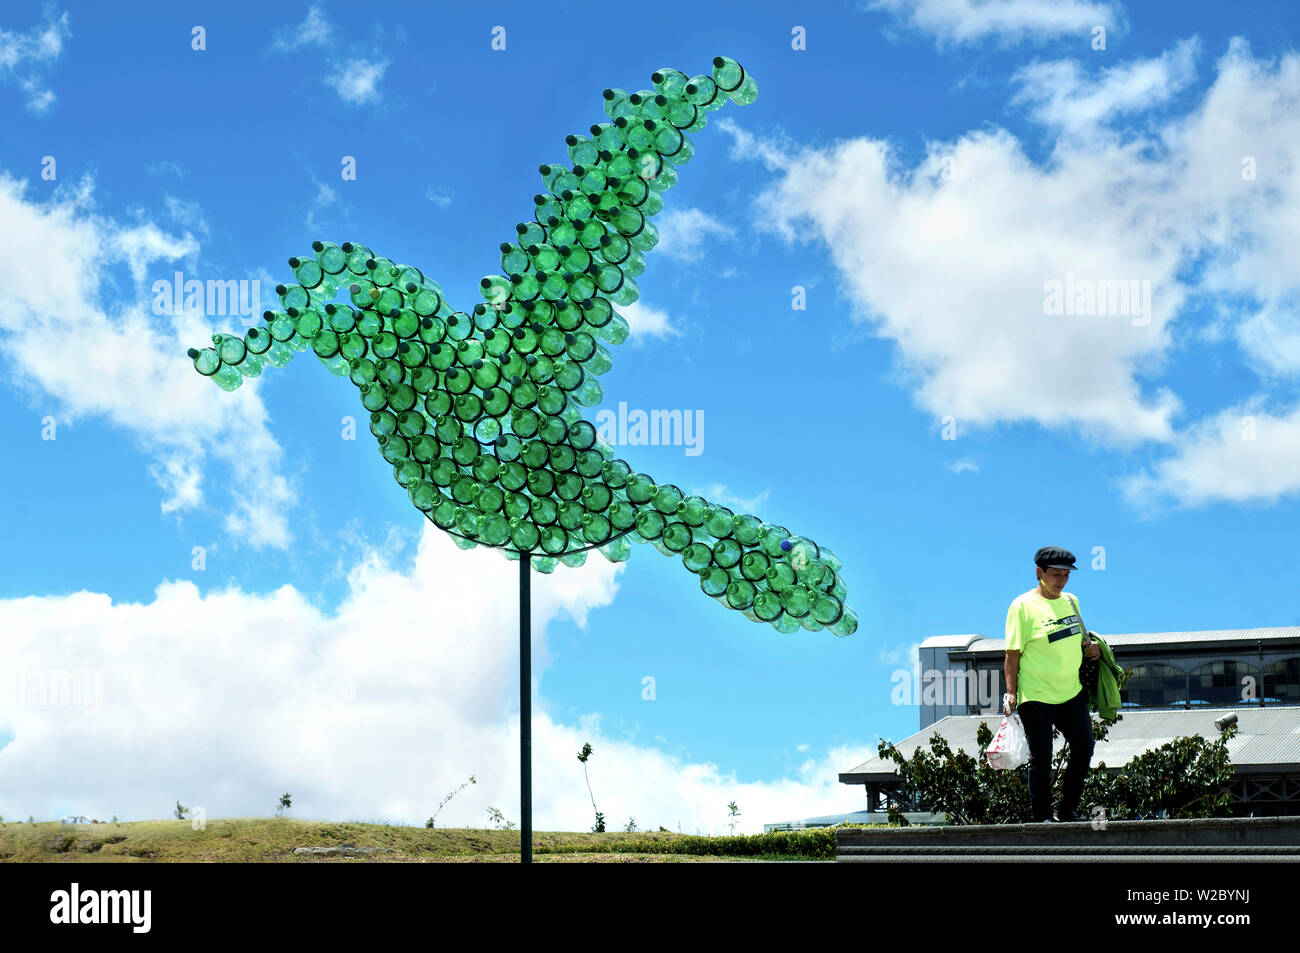 Parque Itchimbia, Bird Sculpture Made Out of Recycled Plastic Bottles, Quito, Ecuador Stock Photo